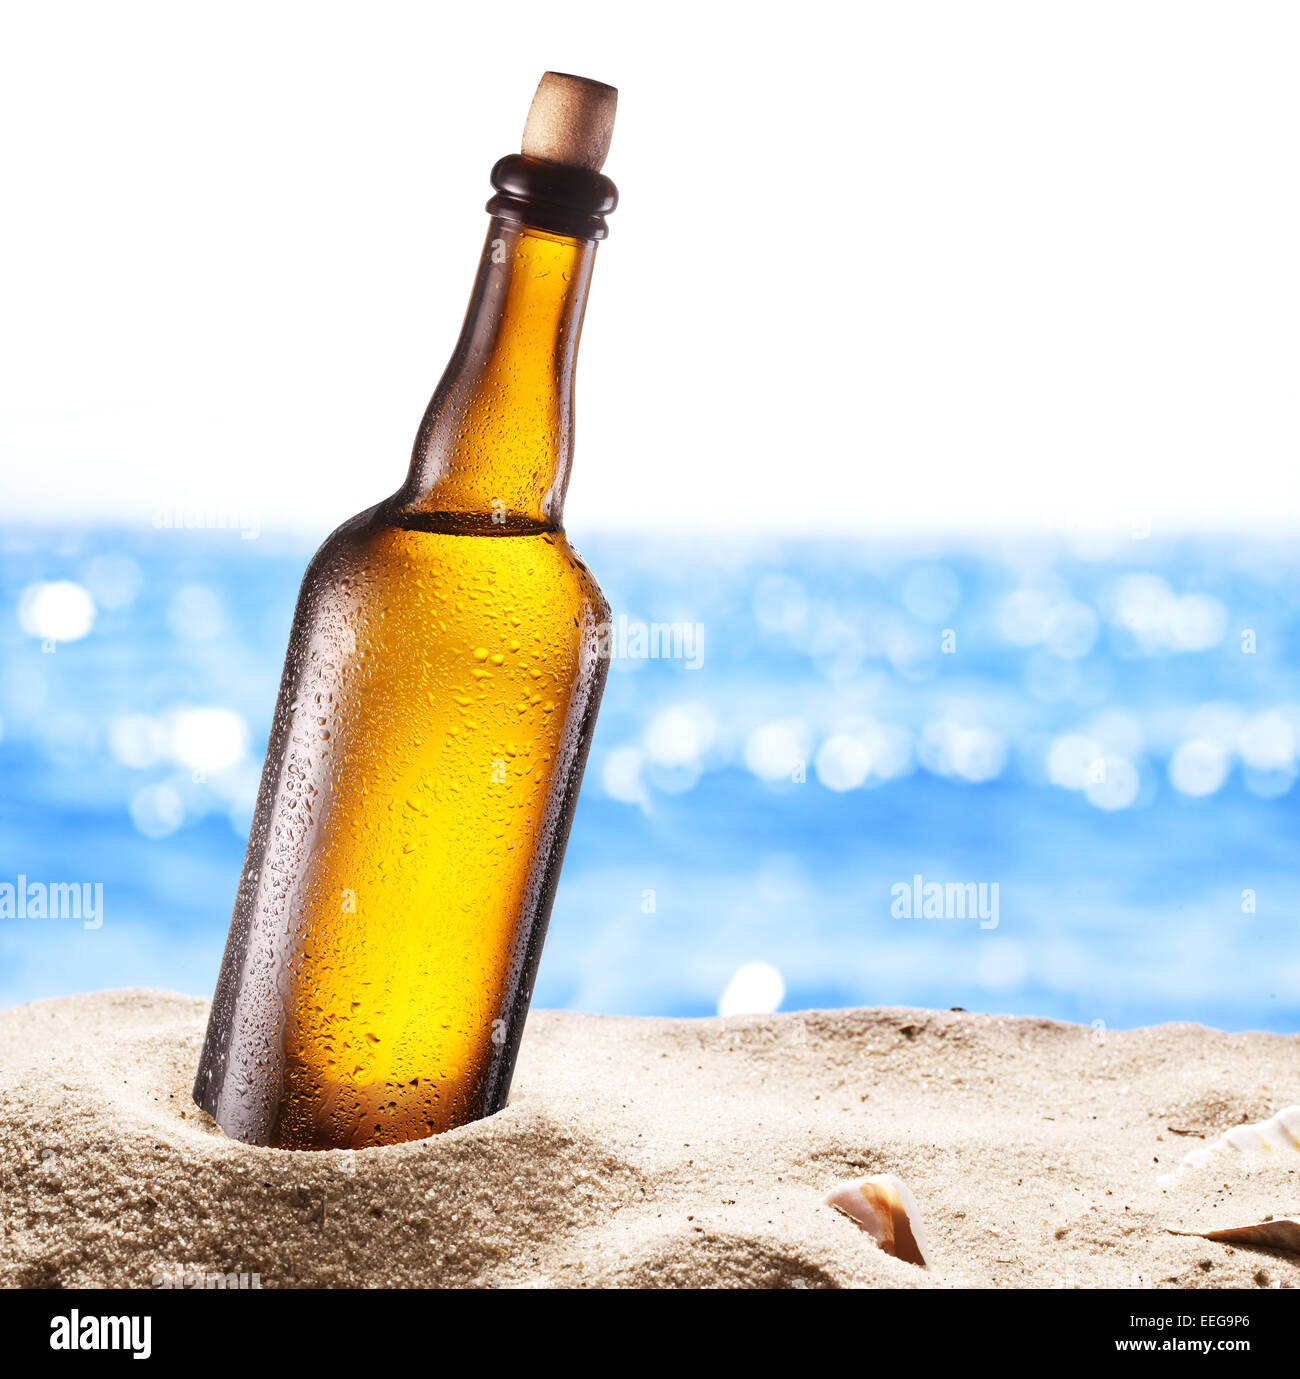 Photo of cold beer bottle in the sand. Sparkling sea at the background. Stock Photo